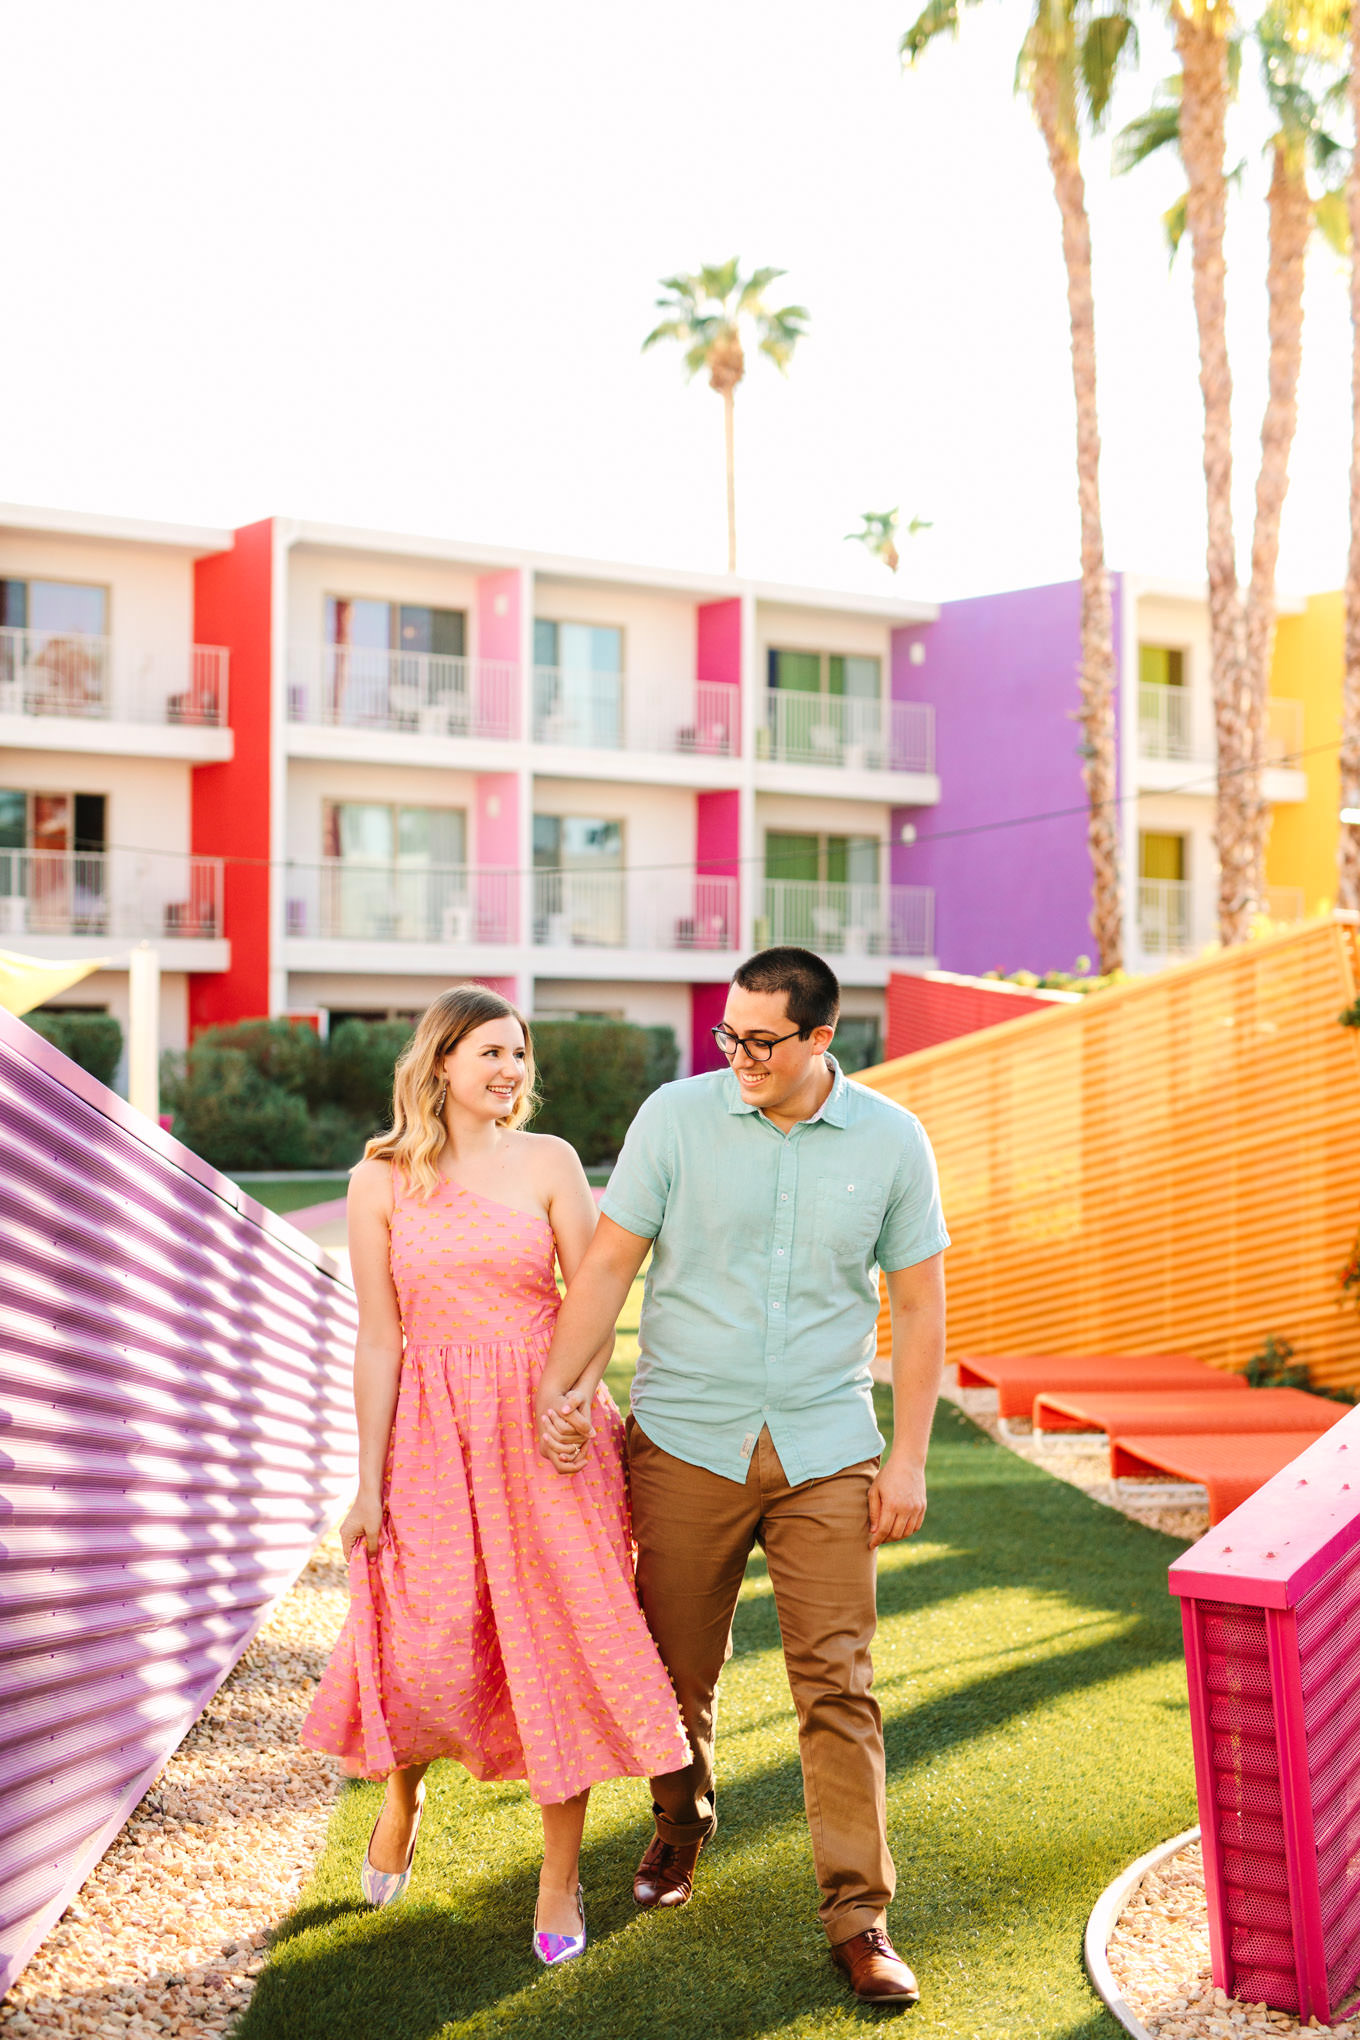 Saguaro Hotel Palm Springs engagement session | Engagement, elopement, and wedding photography roundup of Mary Costa’s favorite images from 2020 | Colorful and elevated photography for fun-loving couples in Southern California | #2020wedding #elopement #weddingphoto #weddingphotography #microwedding   Source: Mary Costa Photography | Los Angeles